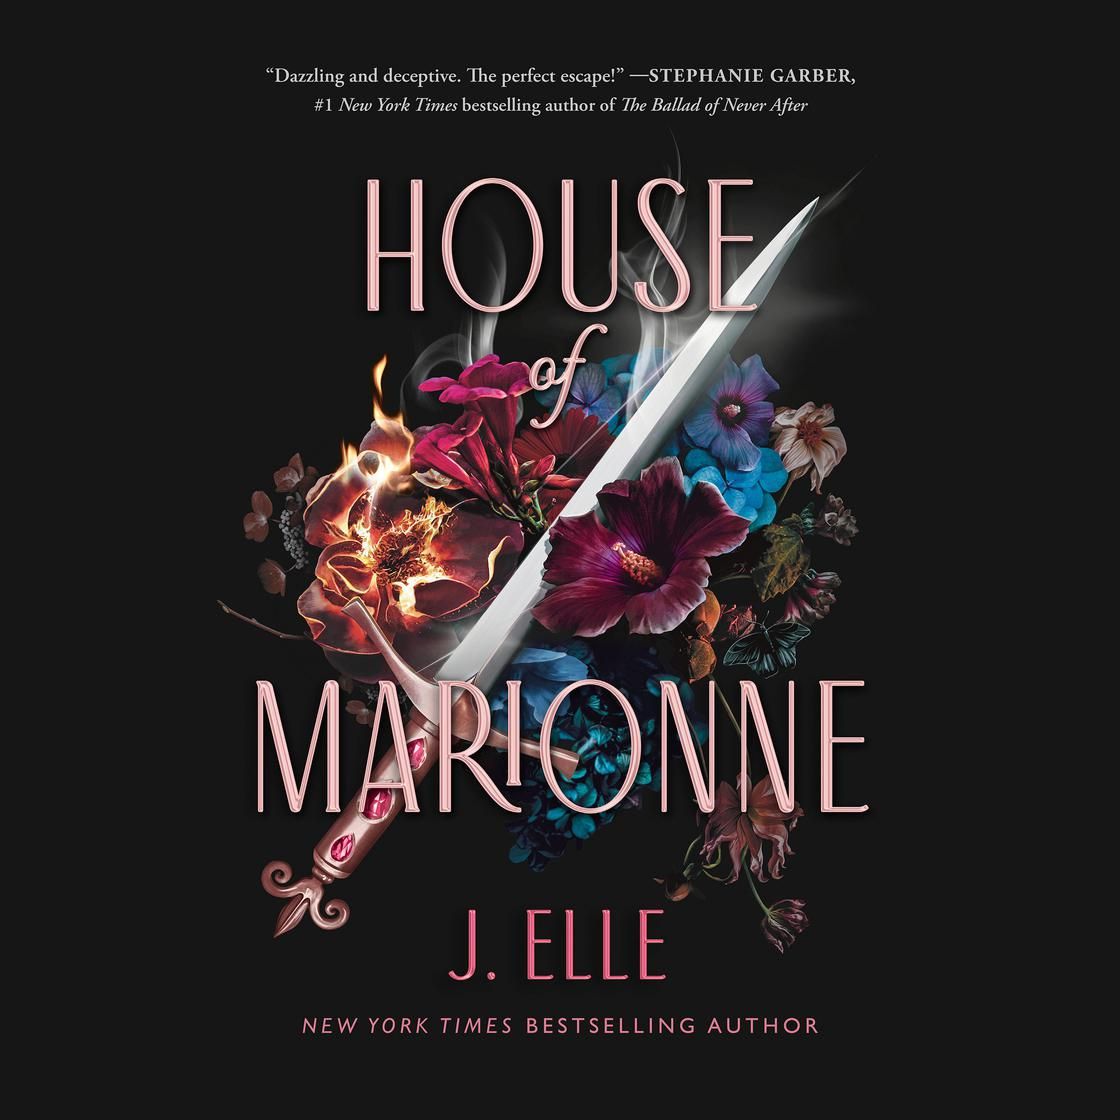 House of Marionne | Libro.fm (US)